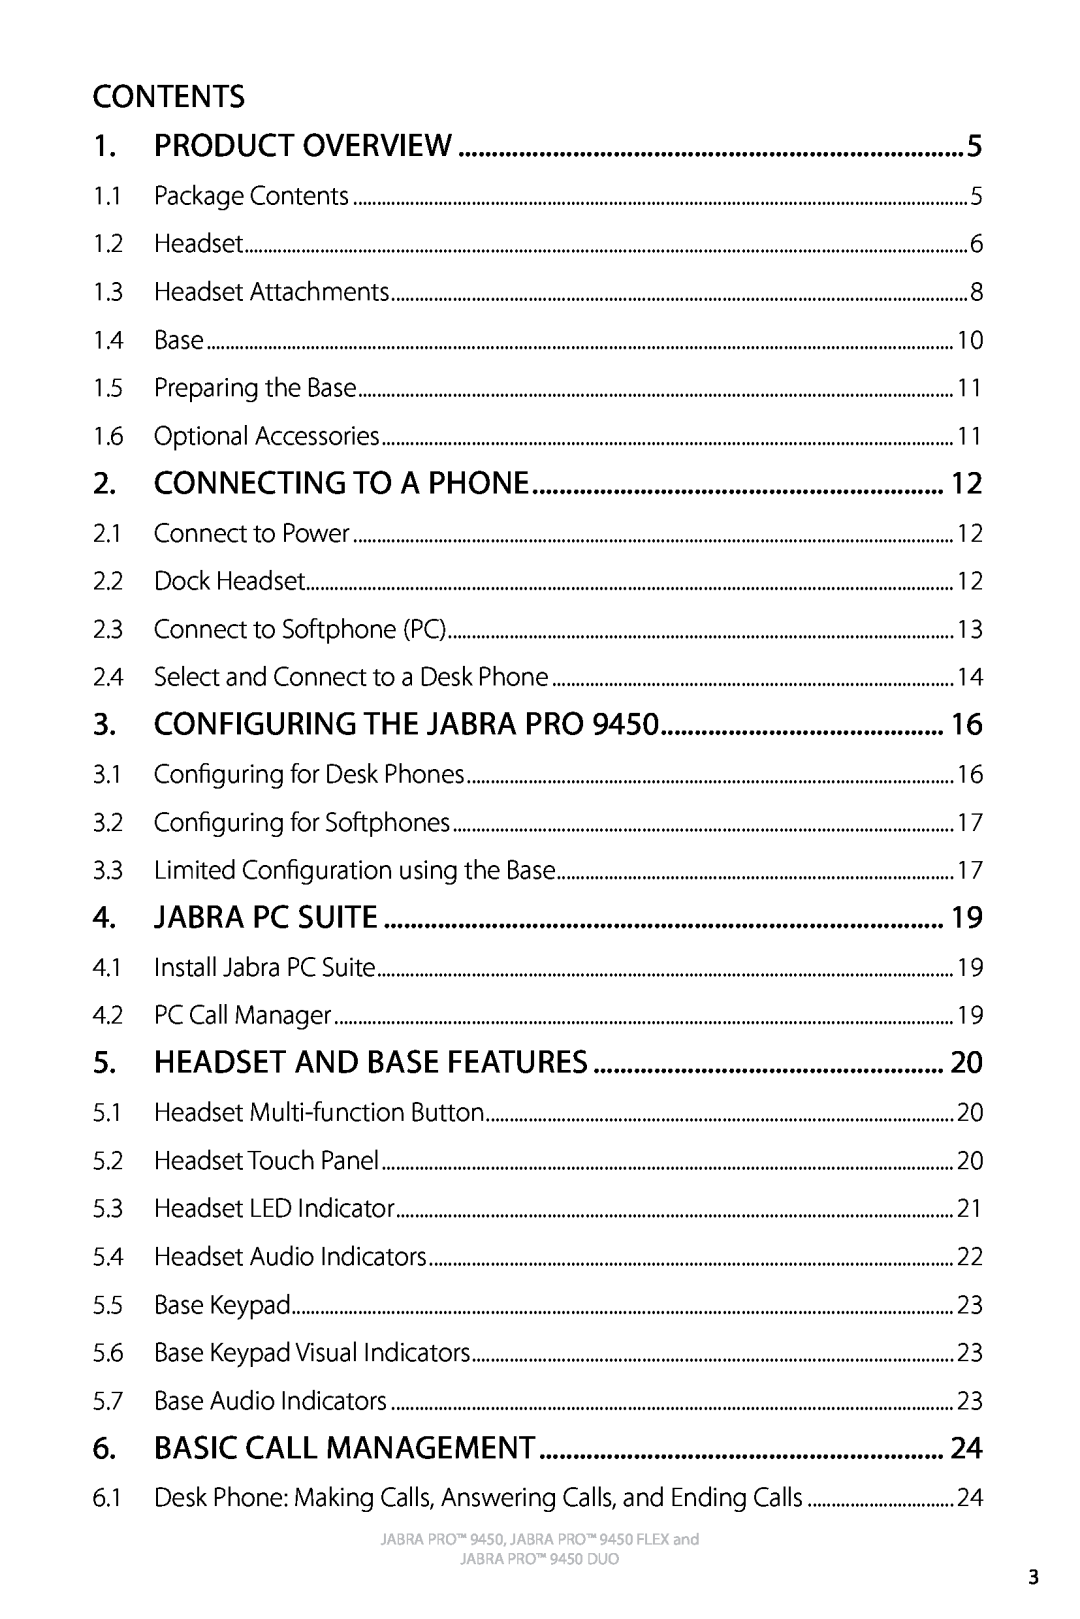 Jabra 9450 user manual Contents, headset and base features 